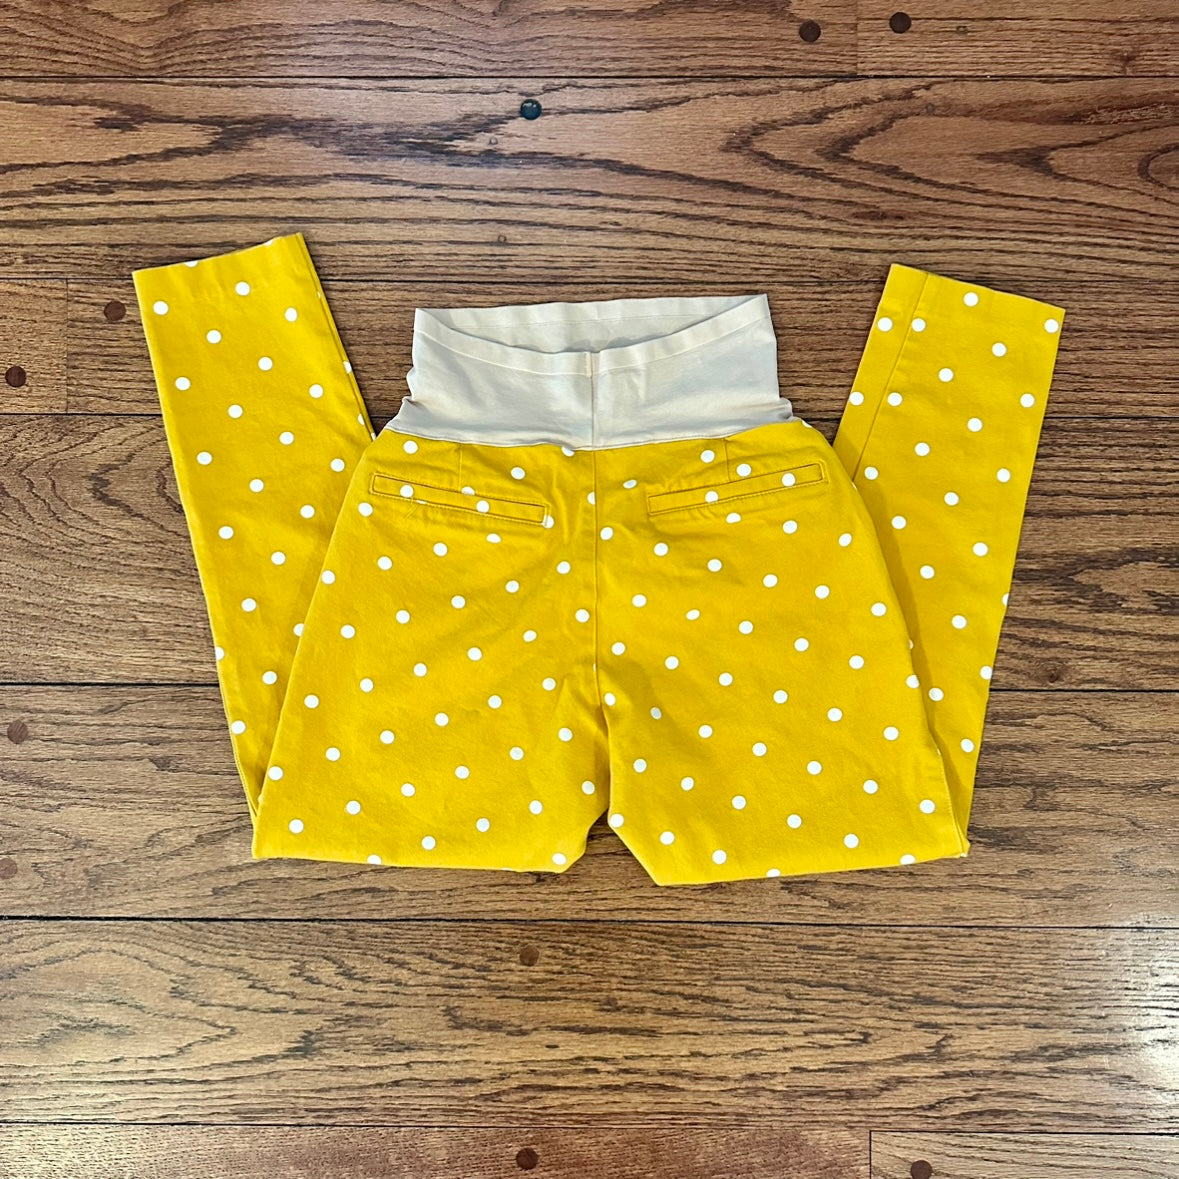 Women's Old Navy Maternity Yellow Polka Dot (full panel) Cropped Pants - size 4